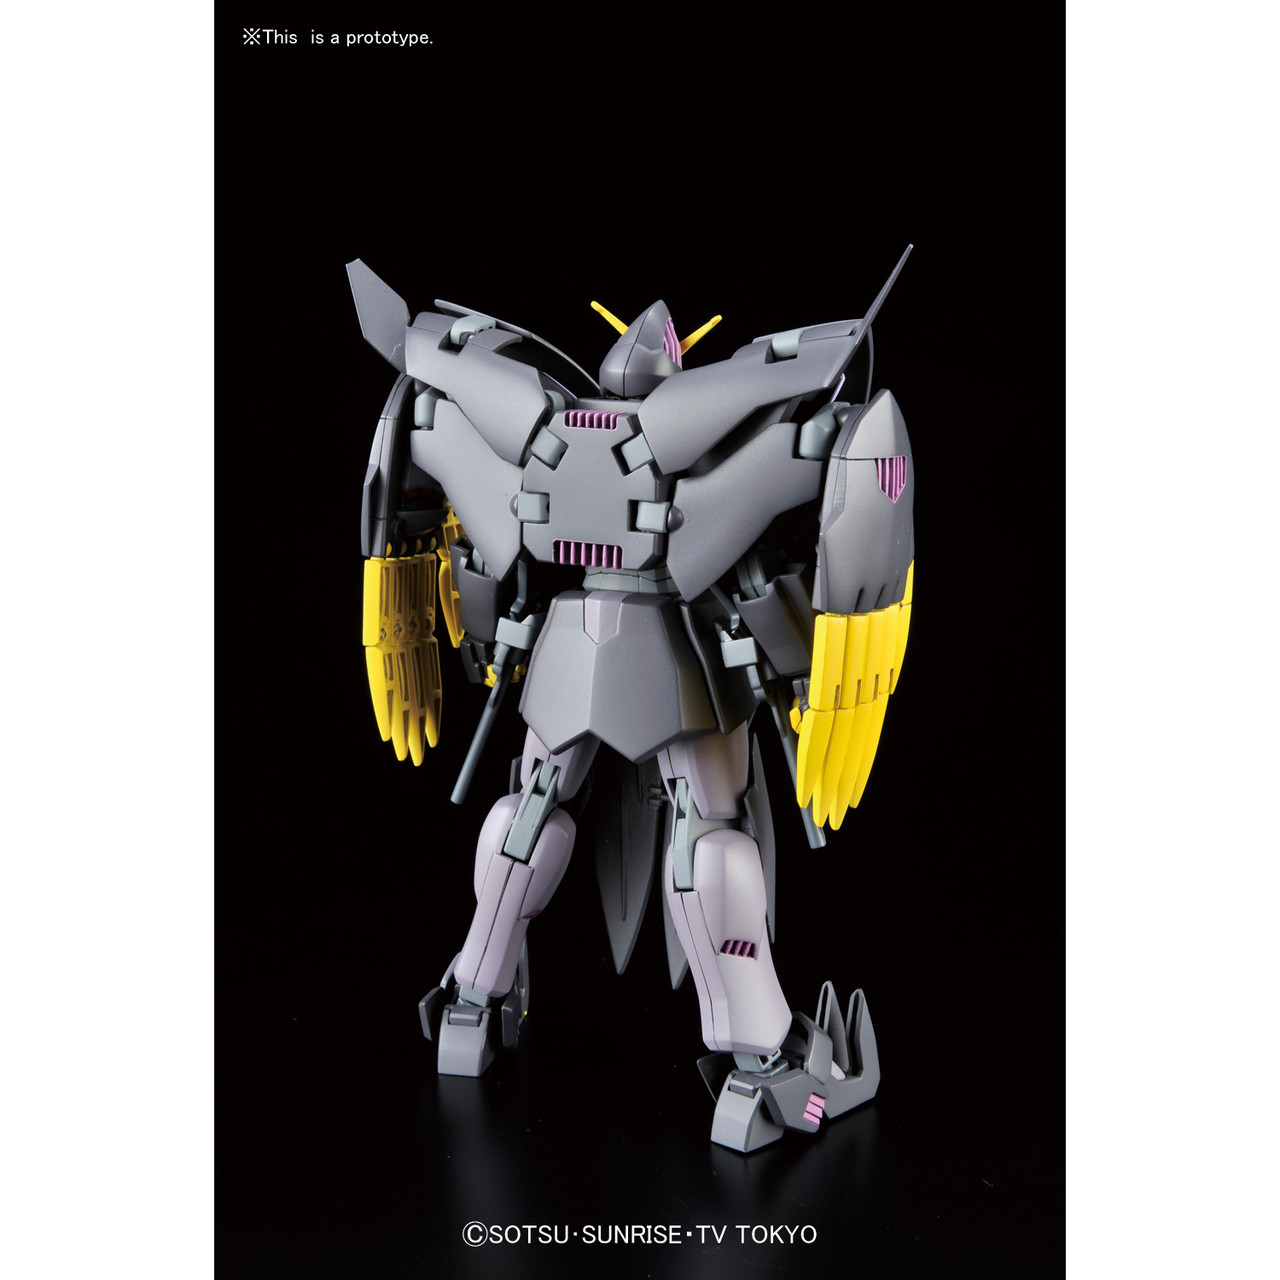 Bandai HG Build Fighters Try 1/144 Gundam The End HGBF 196703 NewInBox for sale online